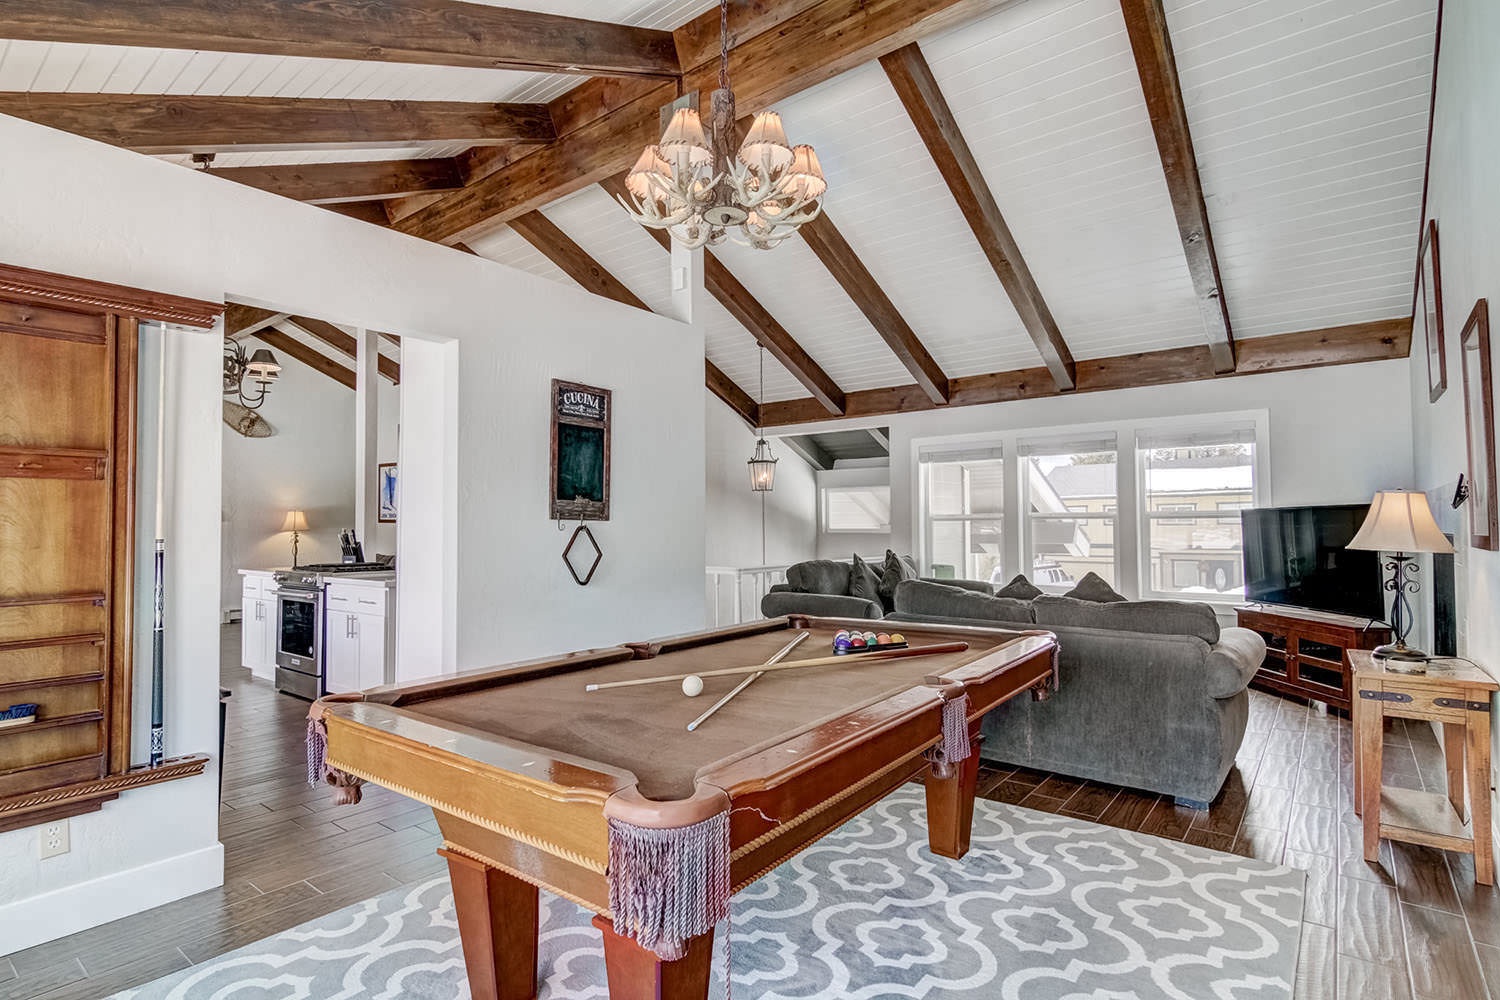 Living Room with Pool Table